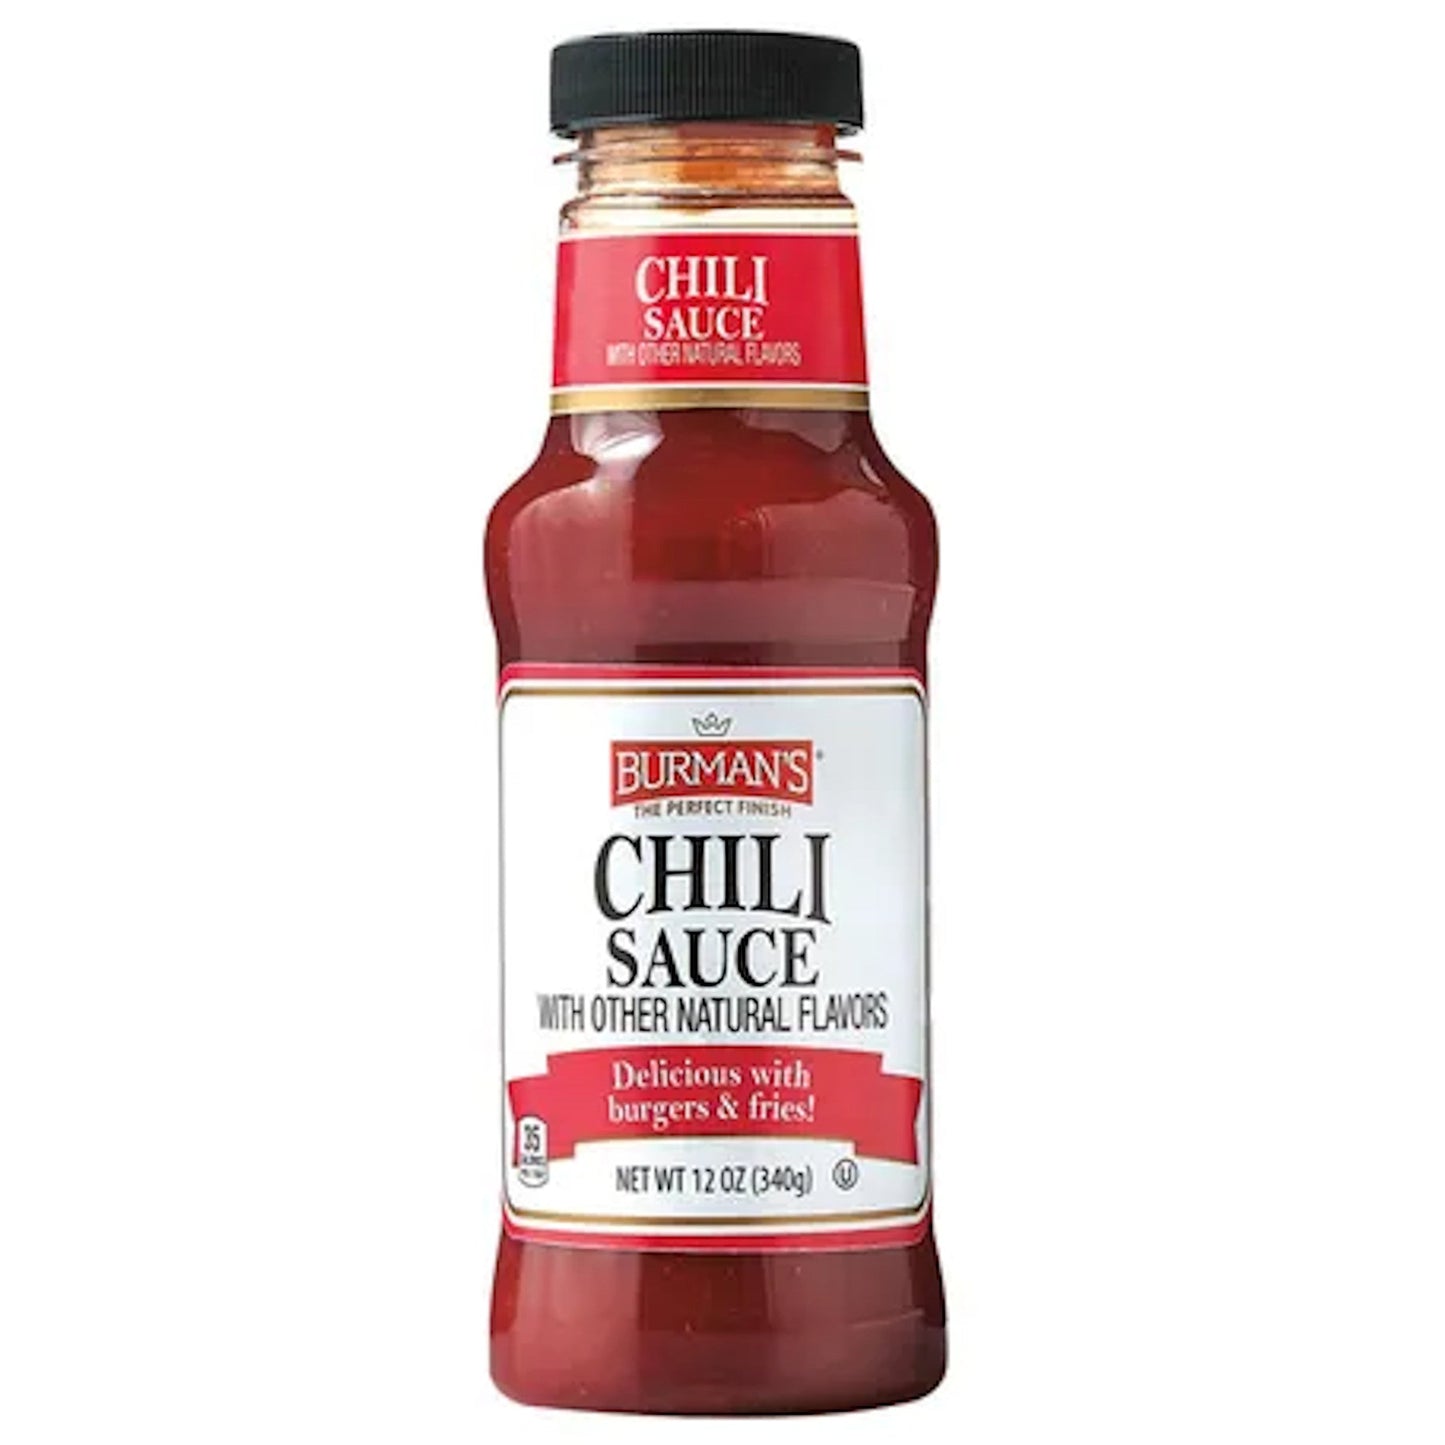 Burman's the Perfect Finish Chili Sauce with Other Natural Flavors - 1 Bottle (12oz)